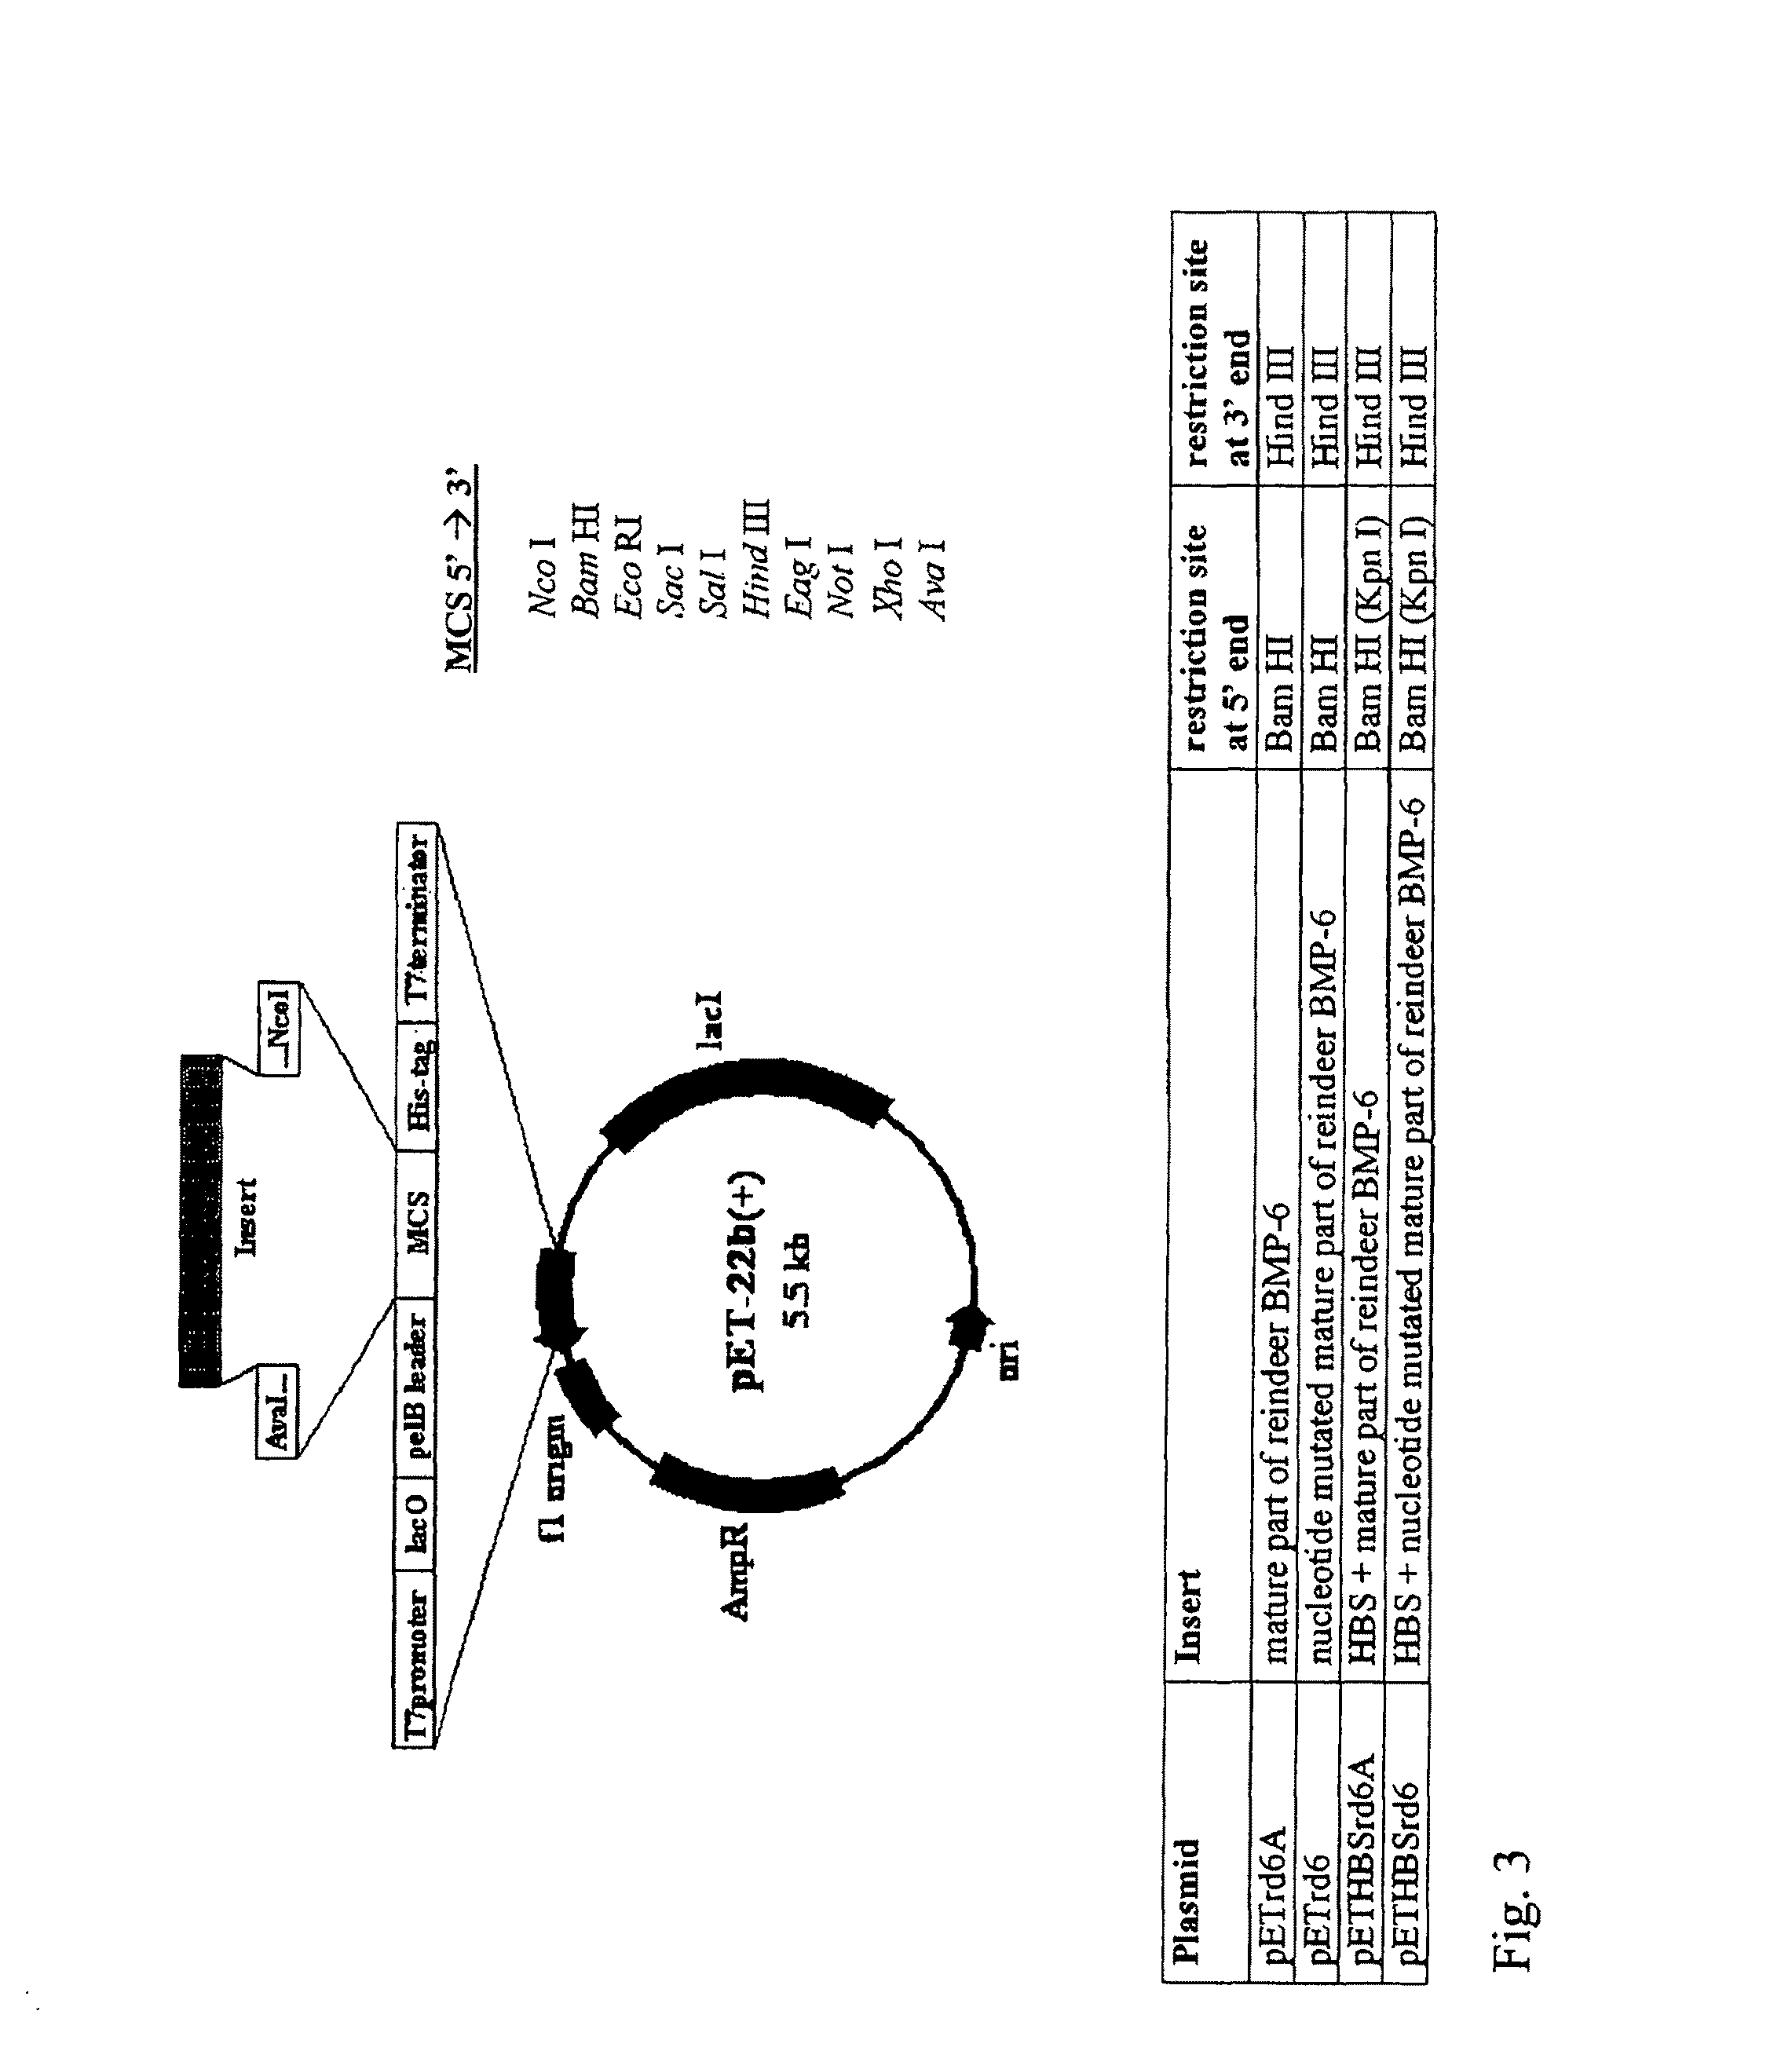 Bone morphogenetic proteins containing a heparin binding site and osteogenic devices and pharmaceutical products containing thereof